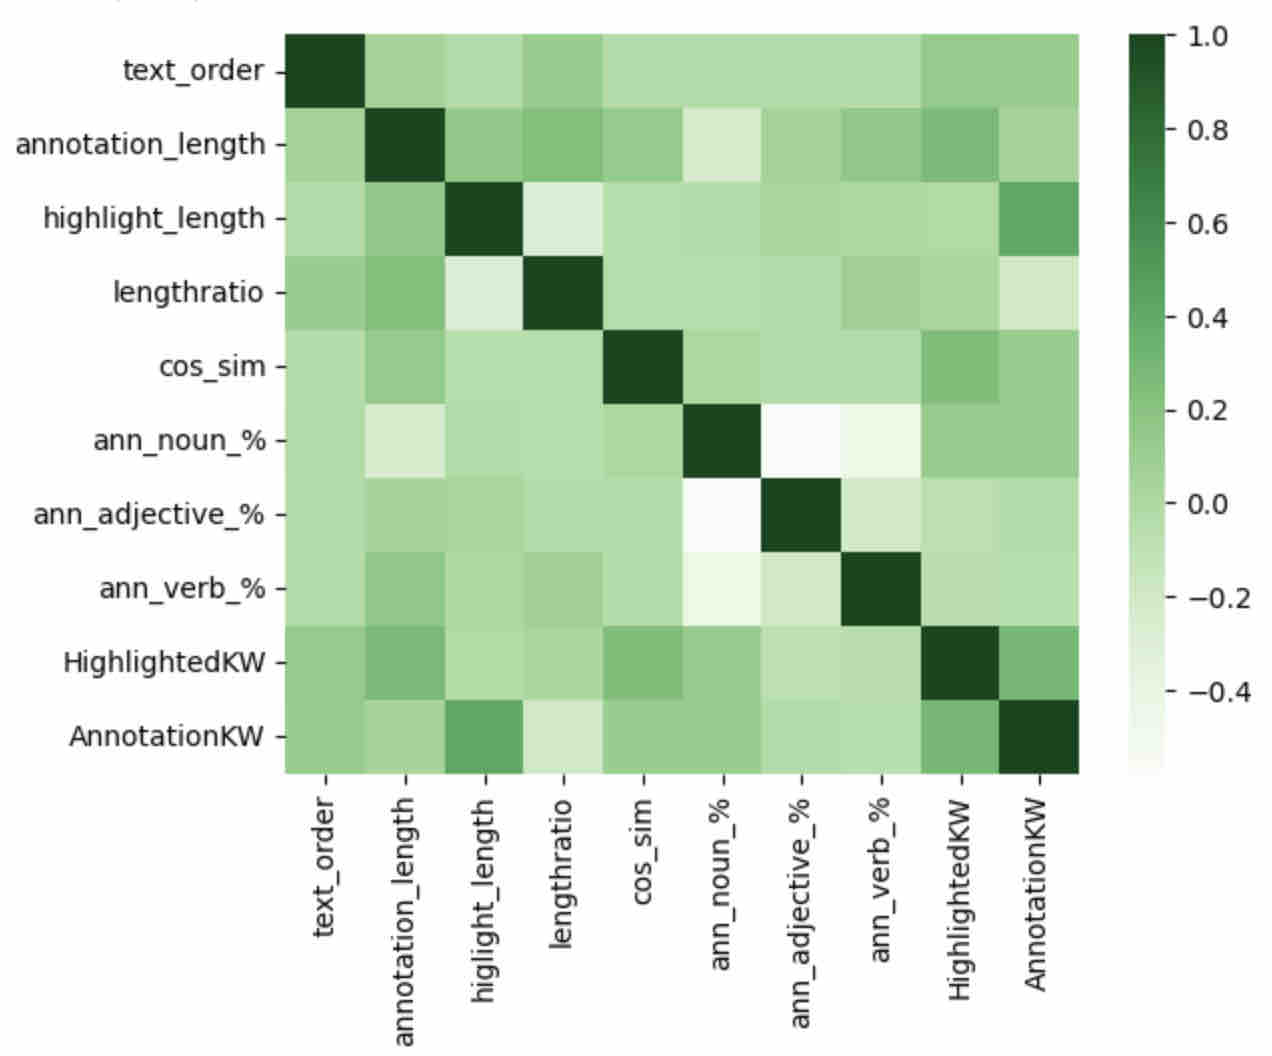 Heatmap showing the correlations among various predictors in the model